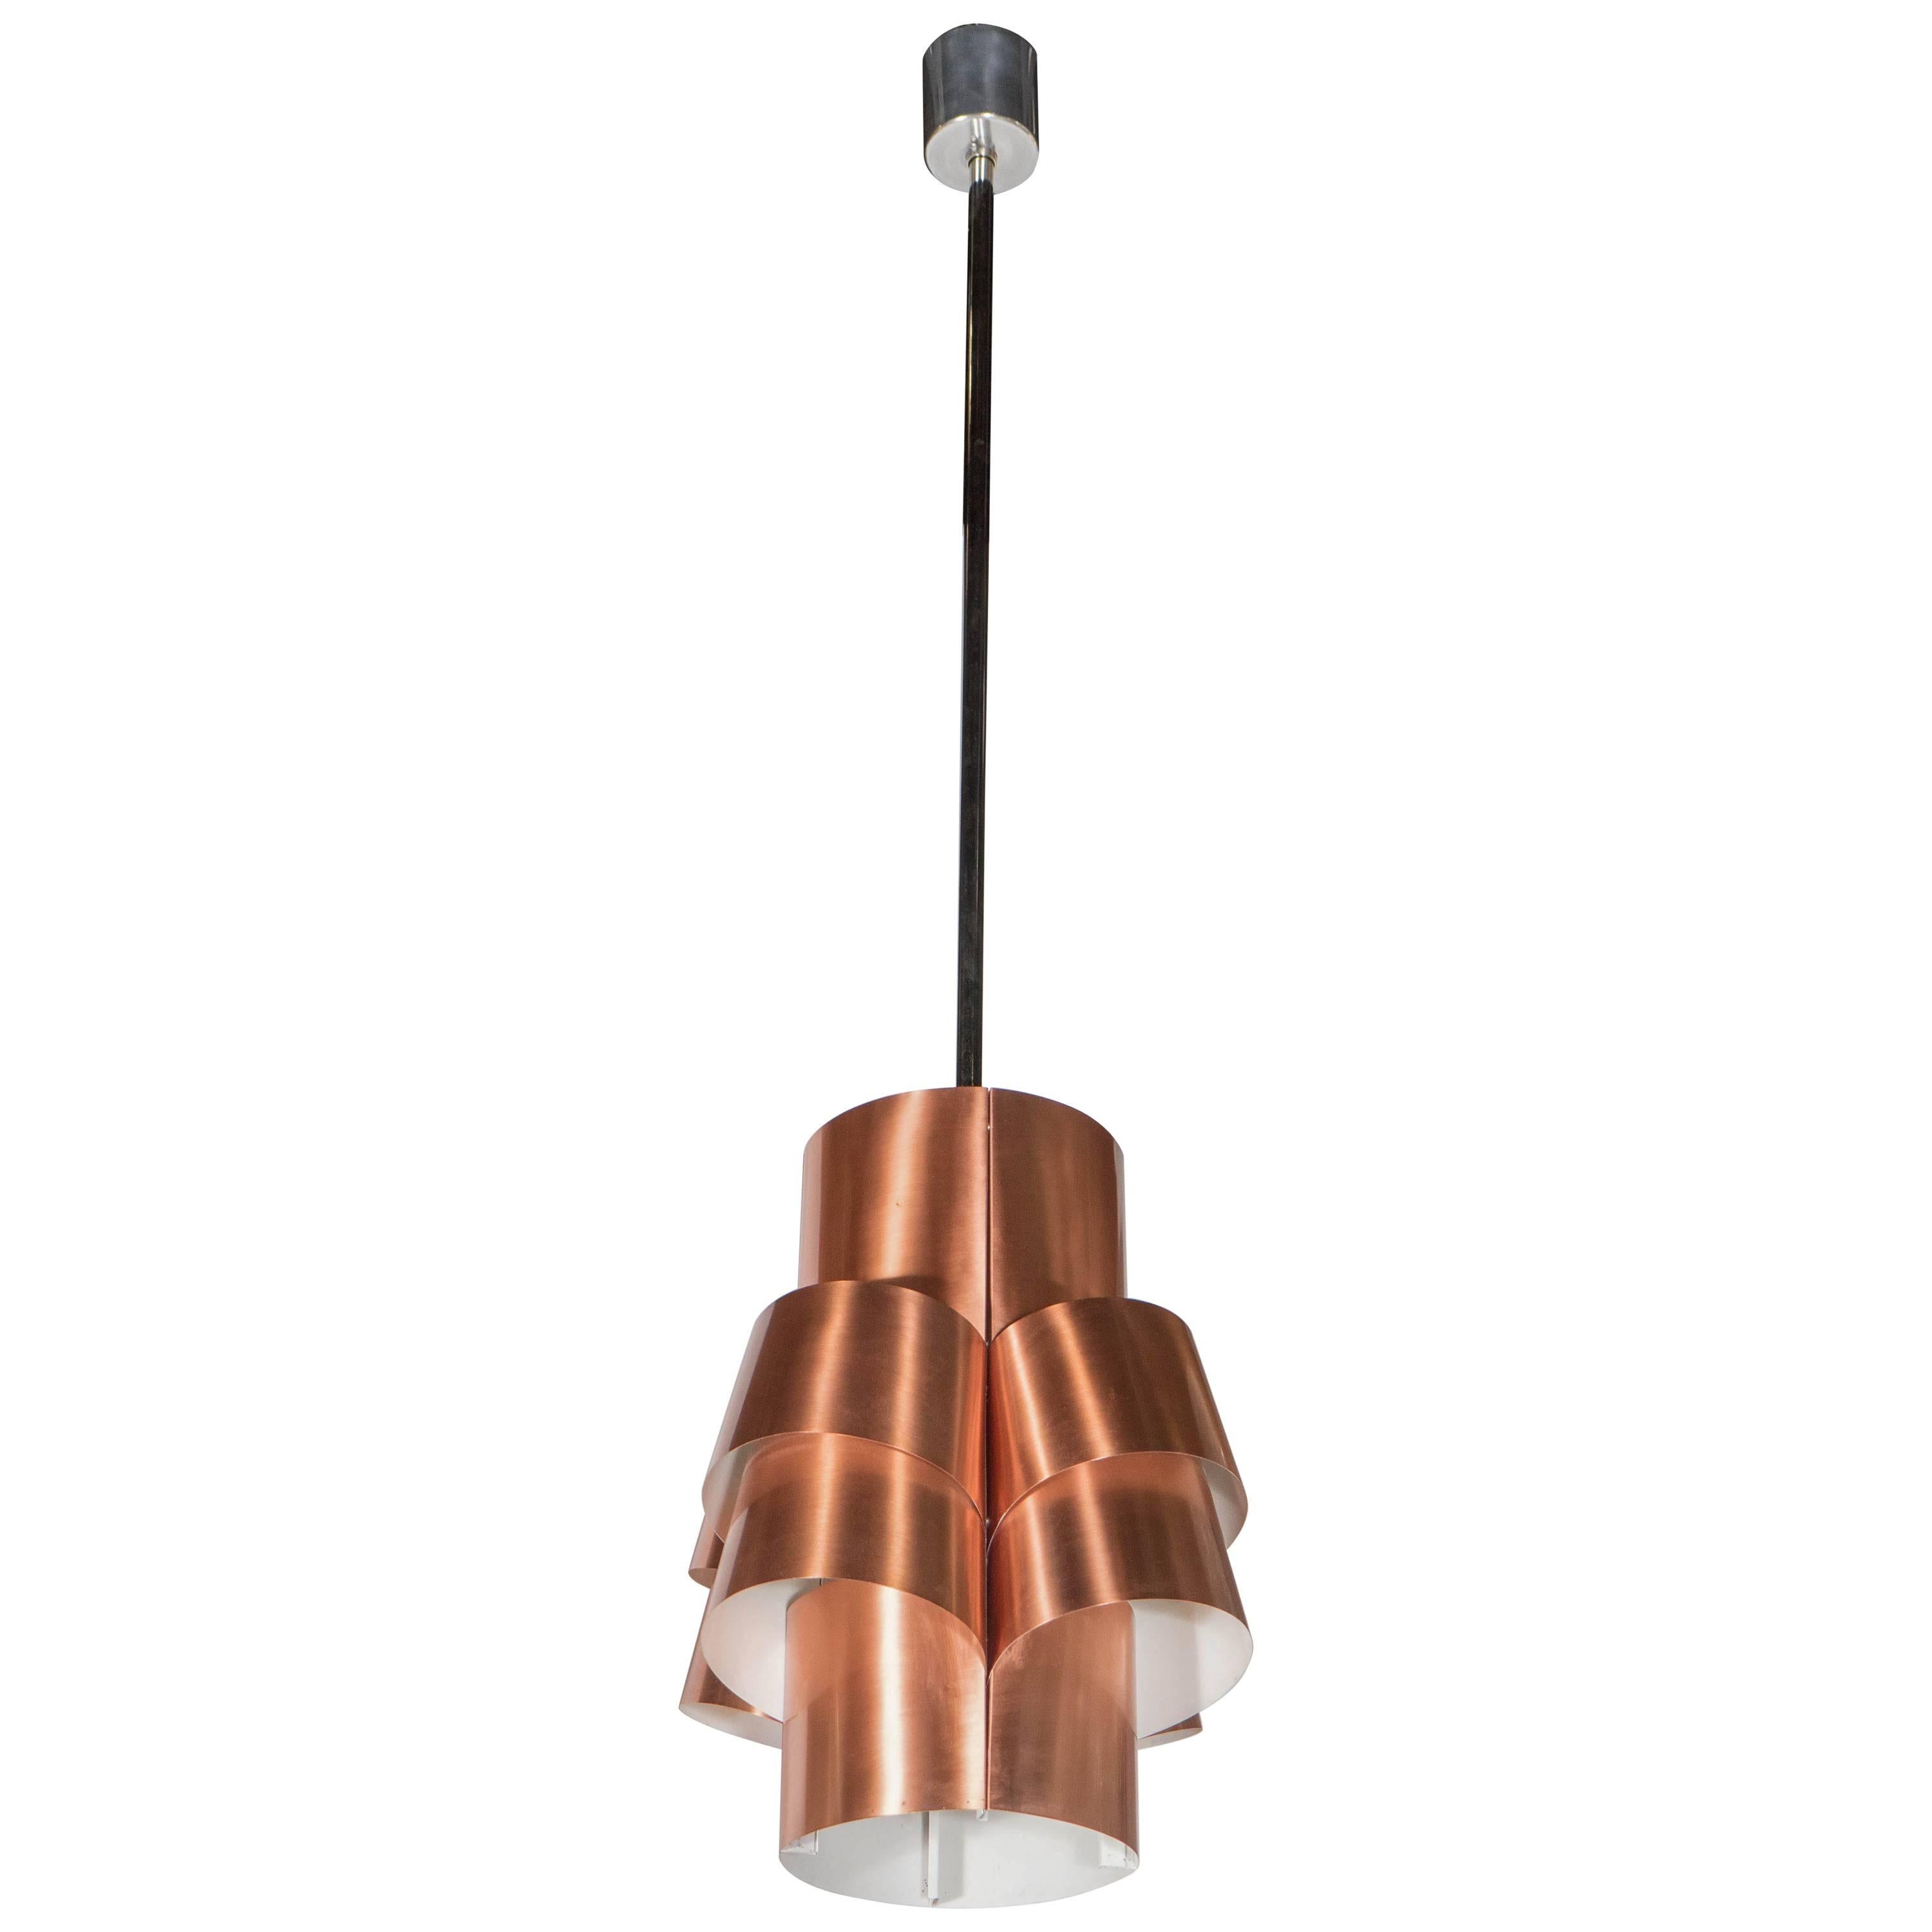 Stunning Segmented Sculptural Pendant Lamp in Copper by Hans-Agne Jakobsson